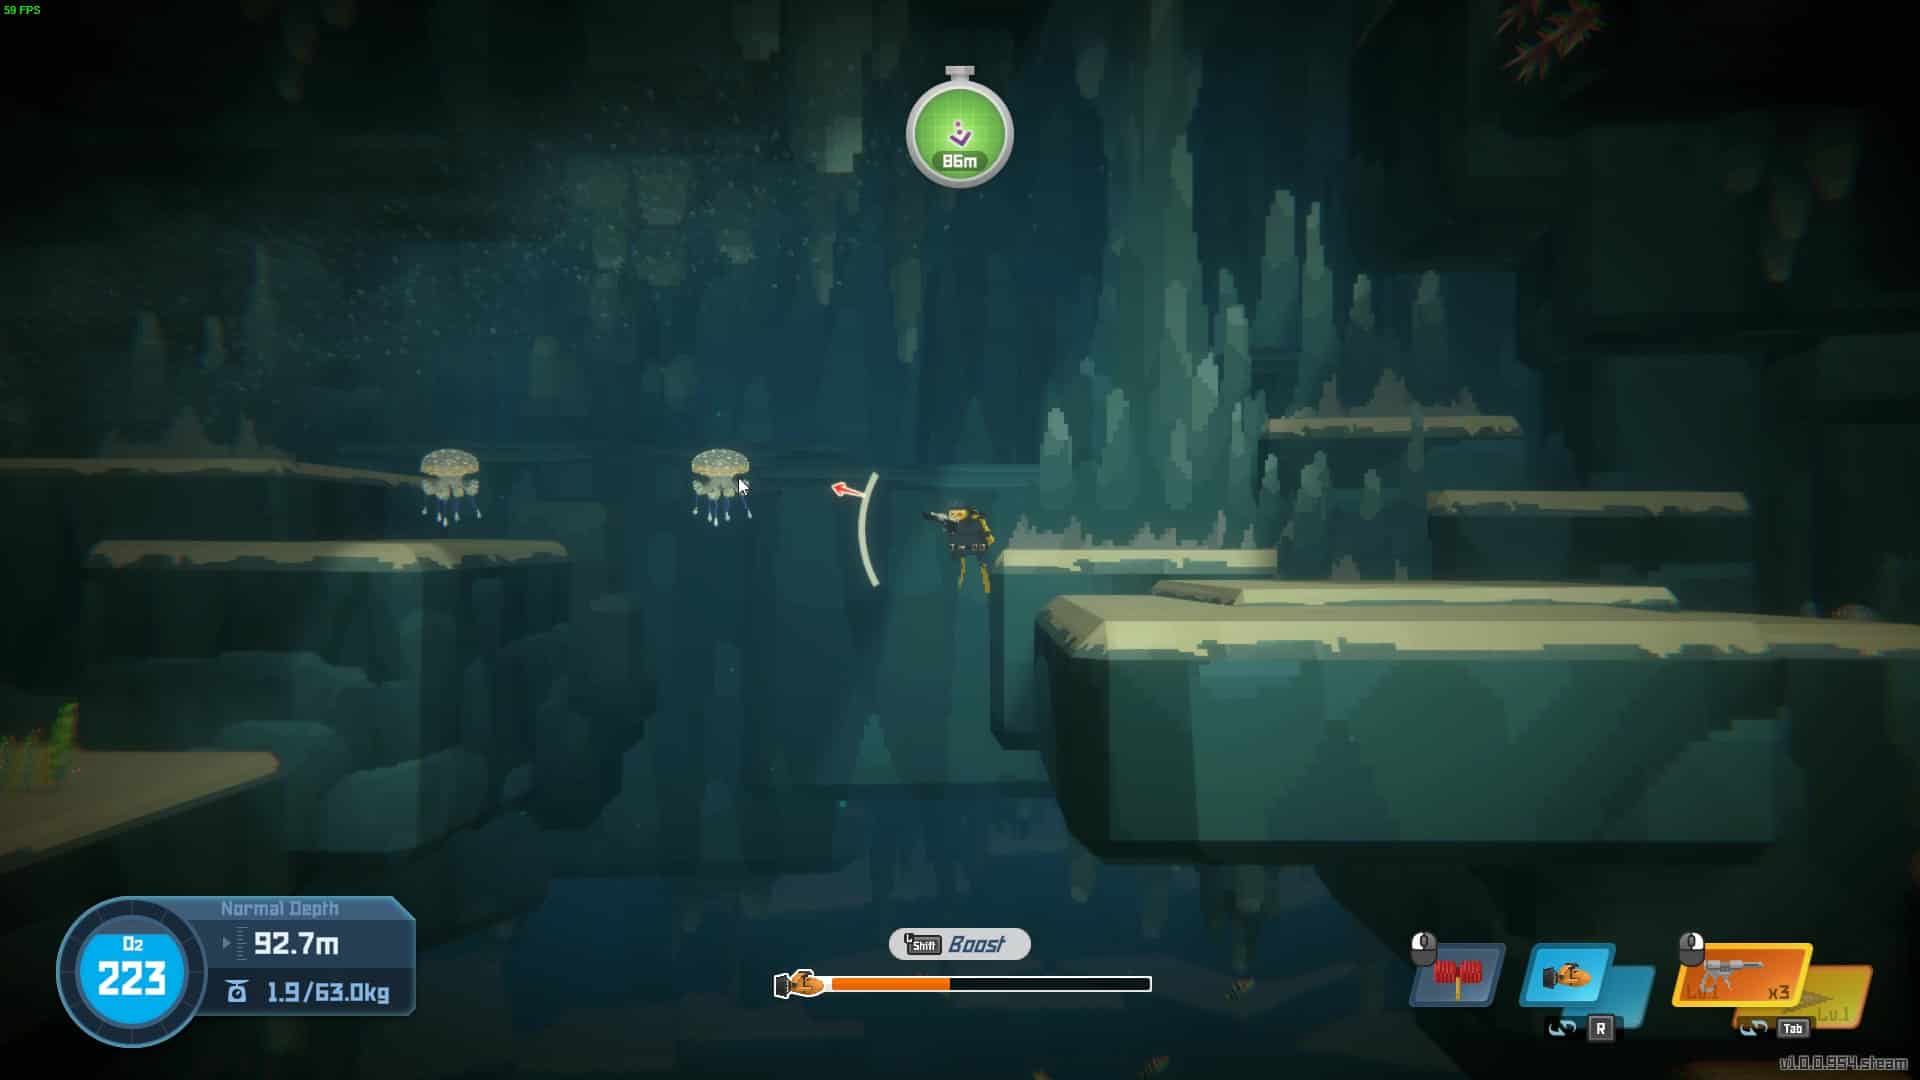 How to catch a jellyfish in Dave the Diver: Dave using Hush Dart on jellyfish.